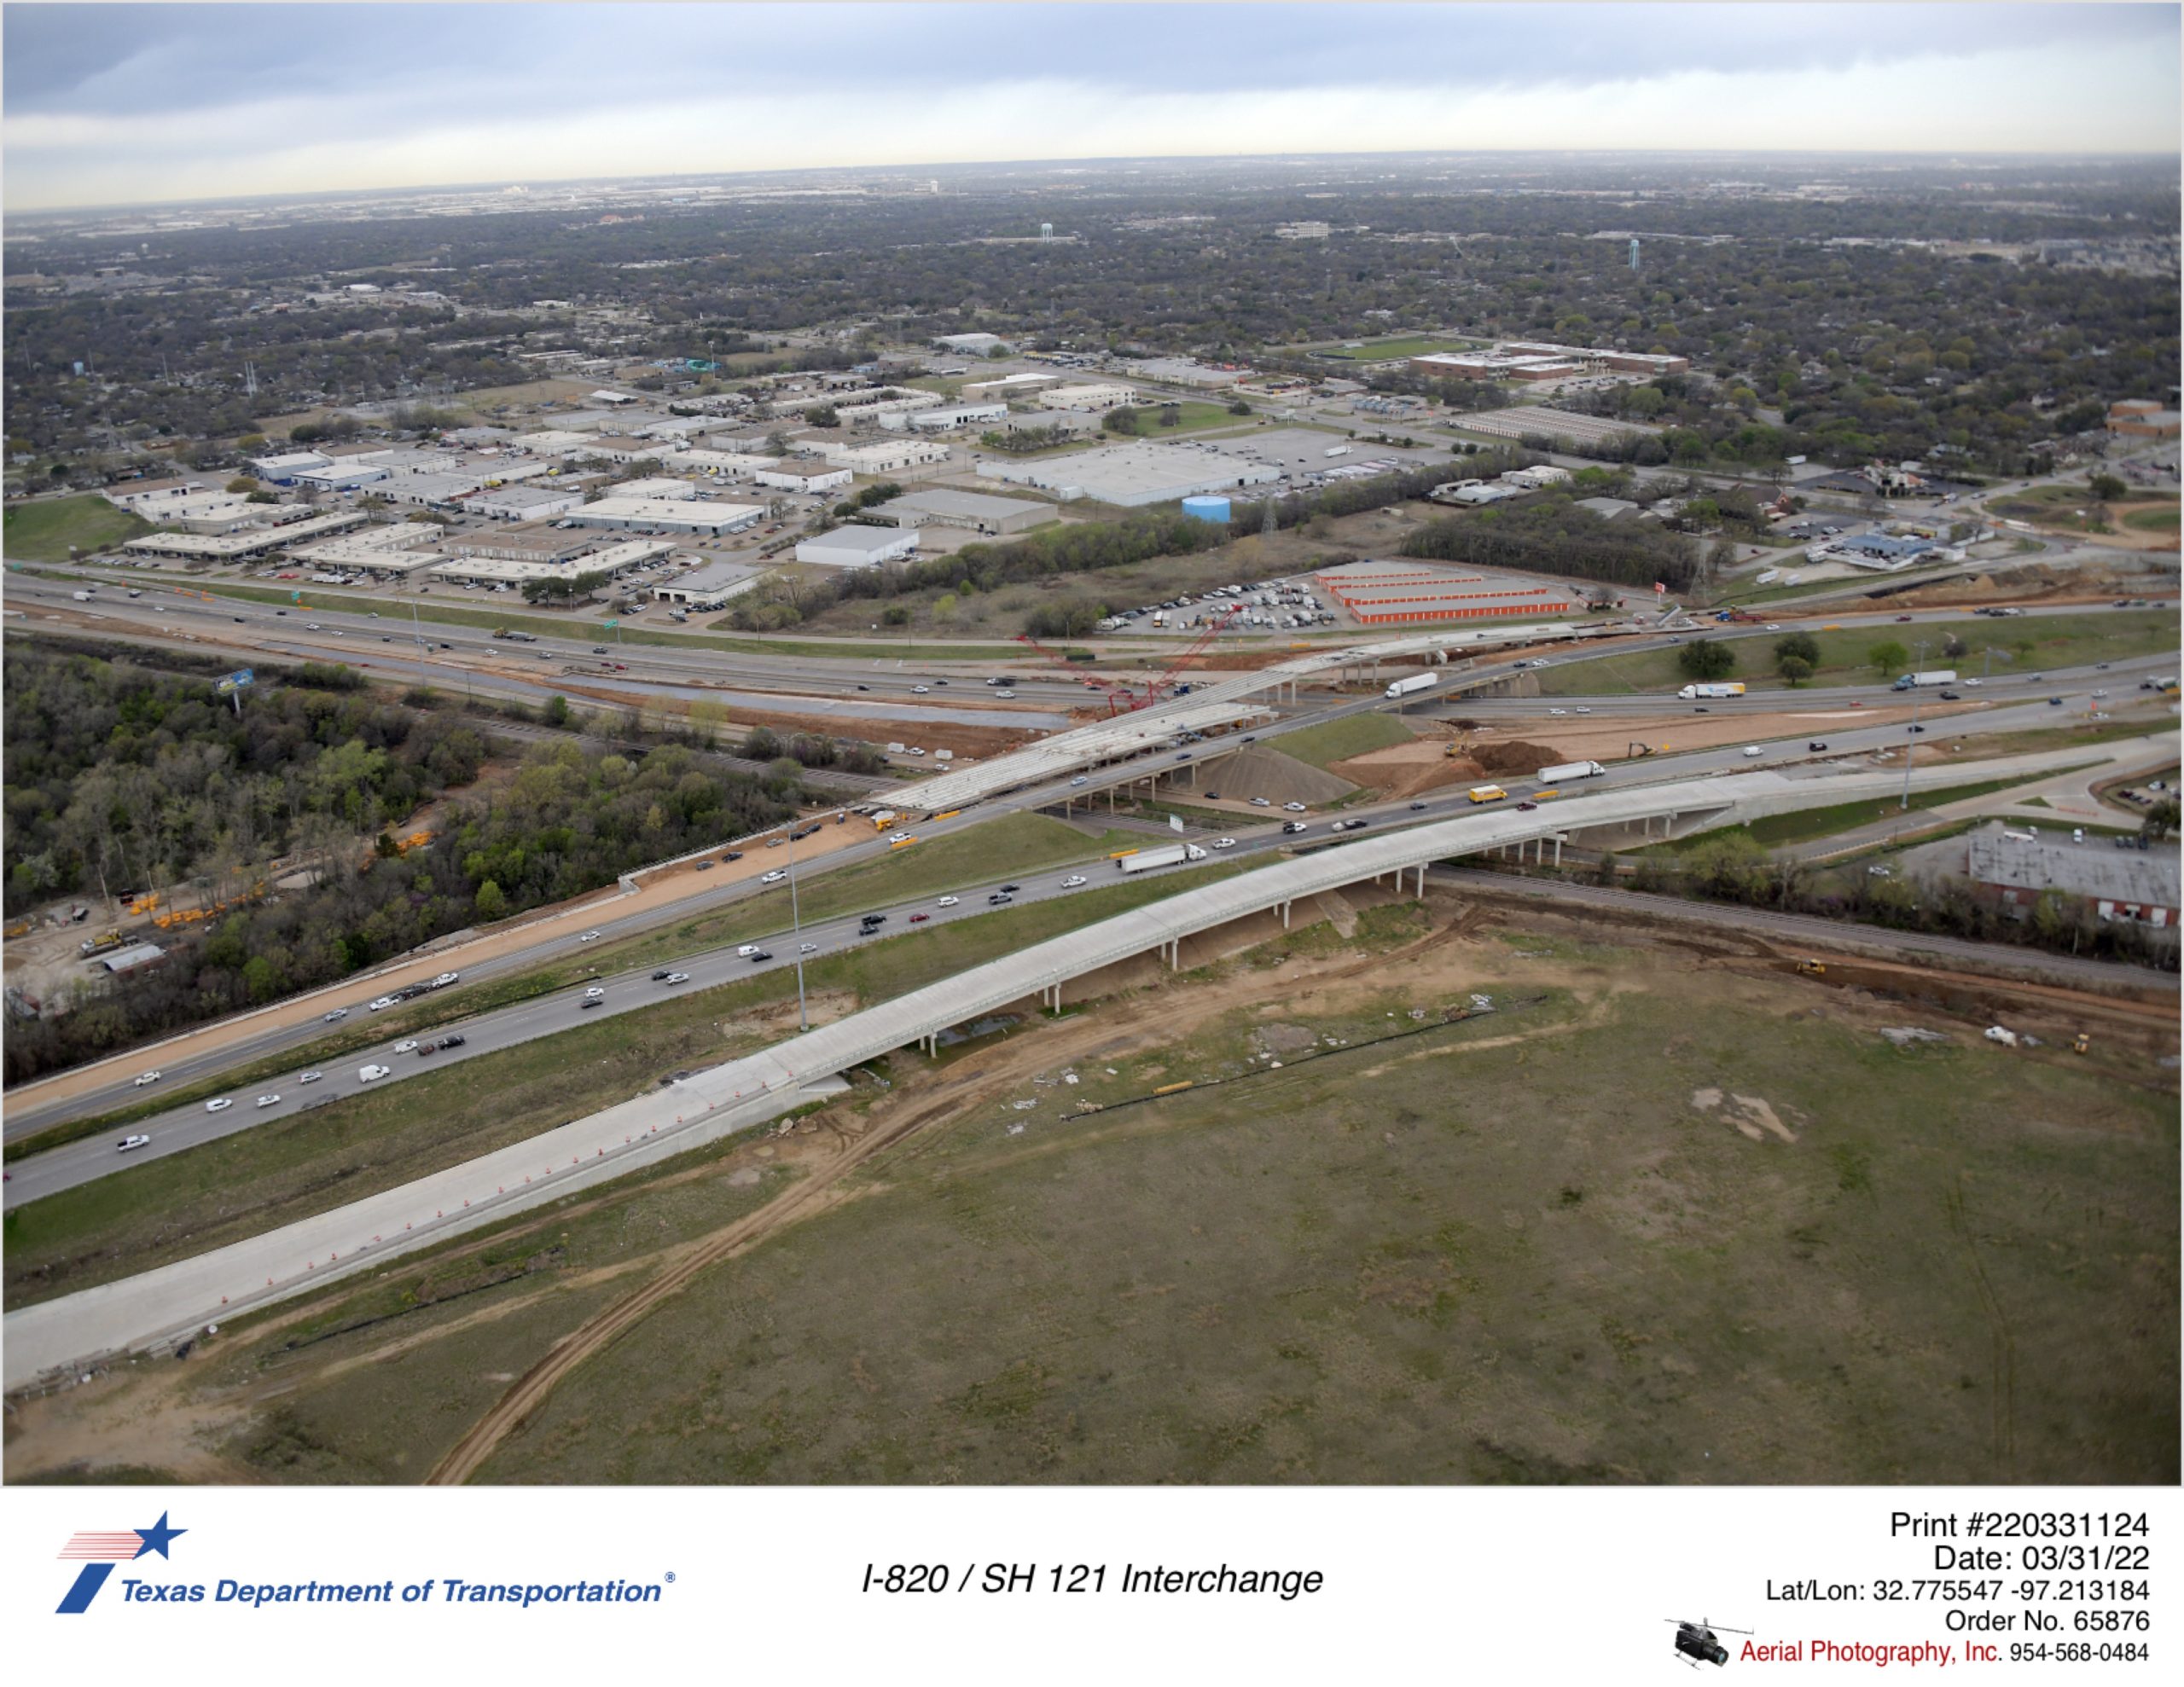 I-820/SH 121 interchange looking northwest.  Progress shown for I-820 southbound frontage road bridge and new northbound frontage road bridge.